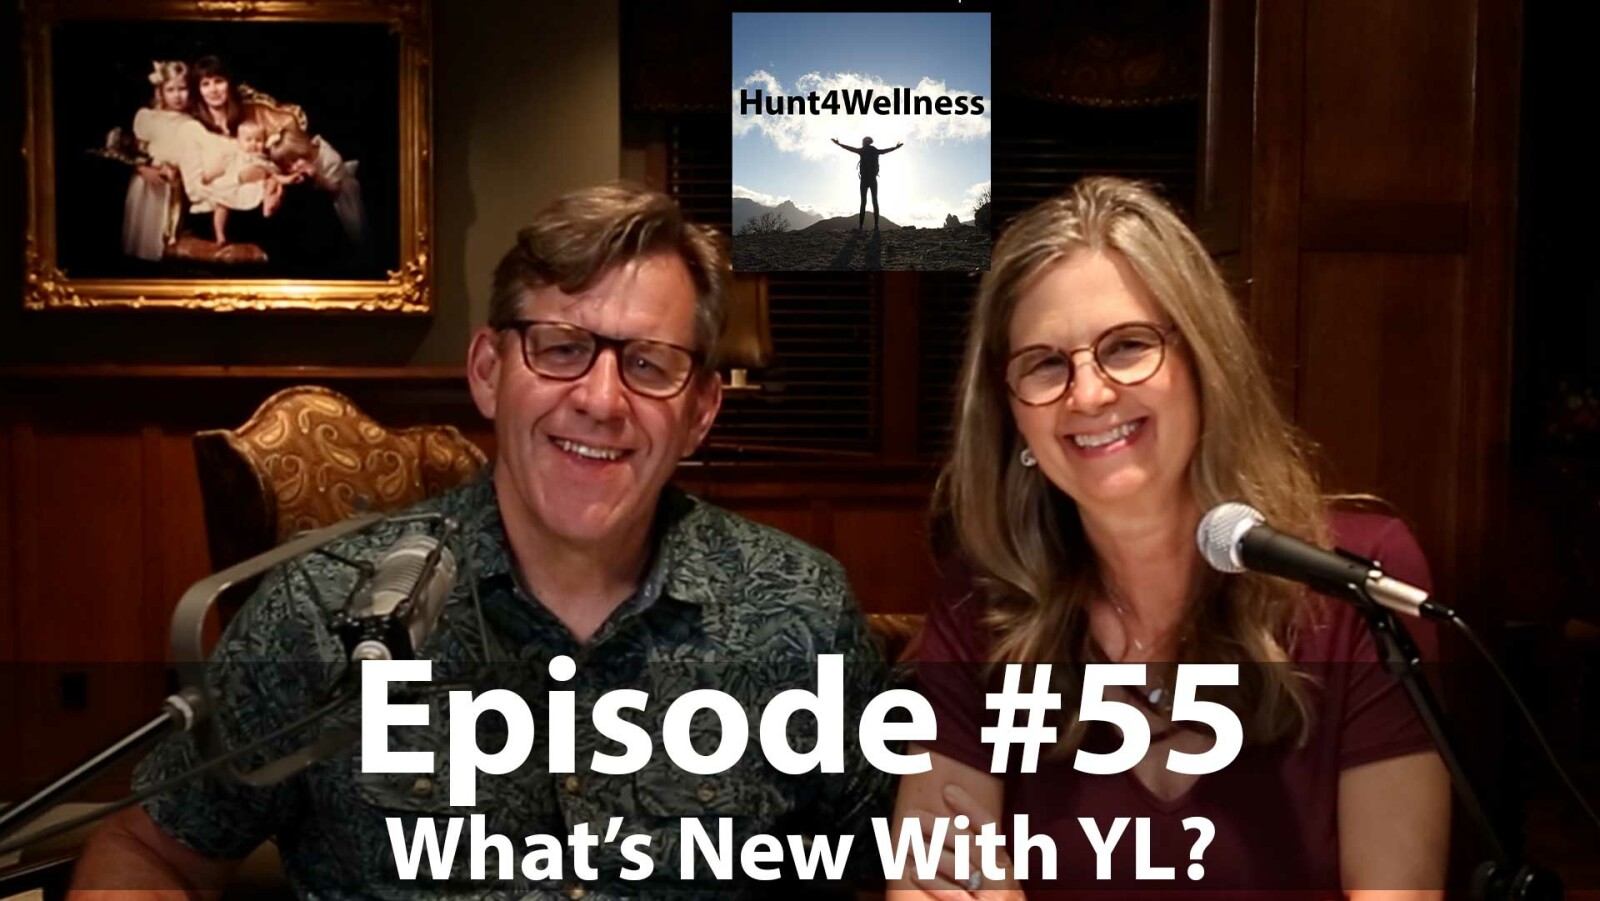 Episode #55 - What's New With YL?